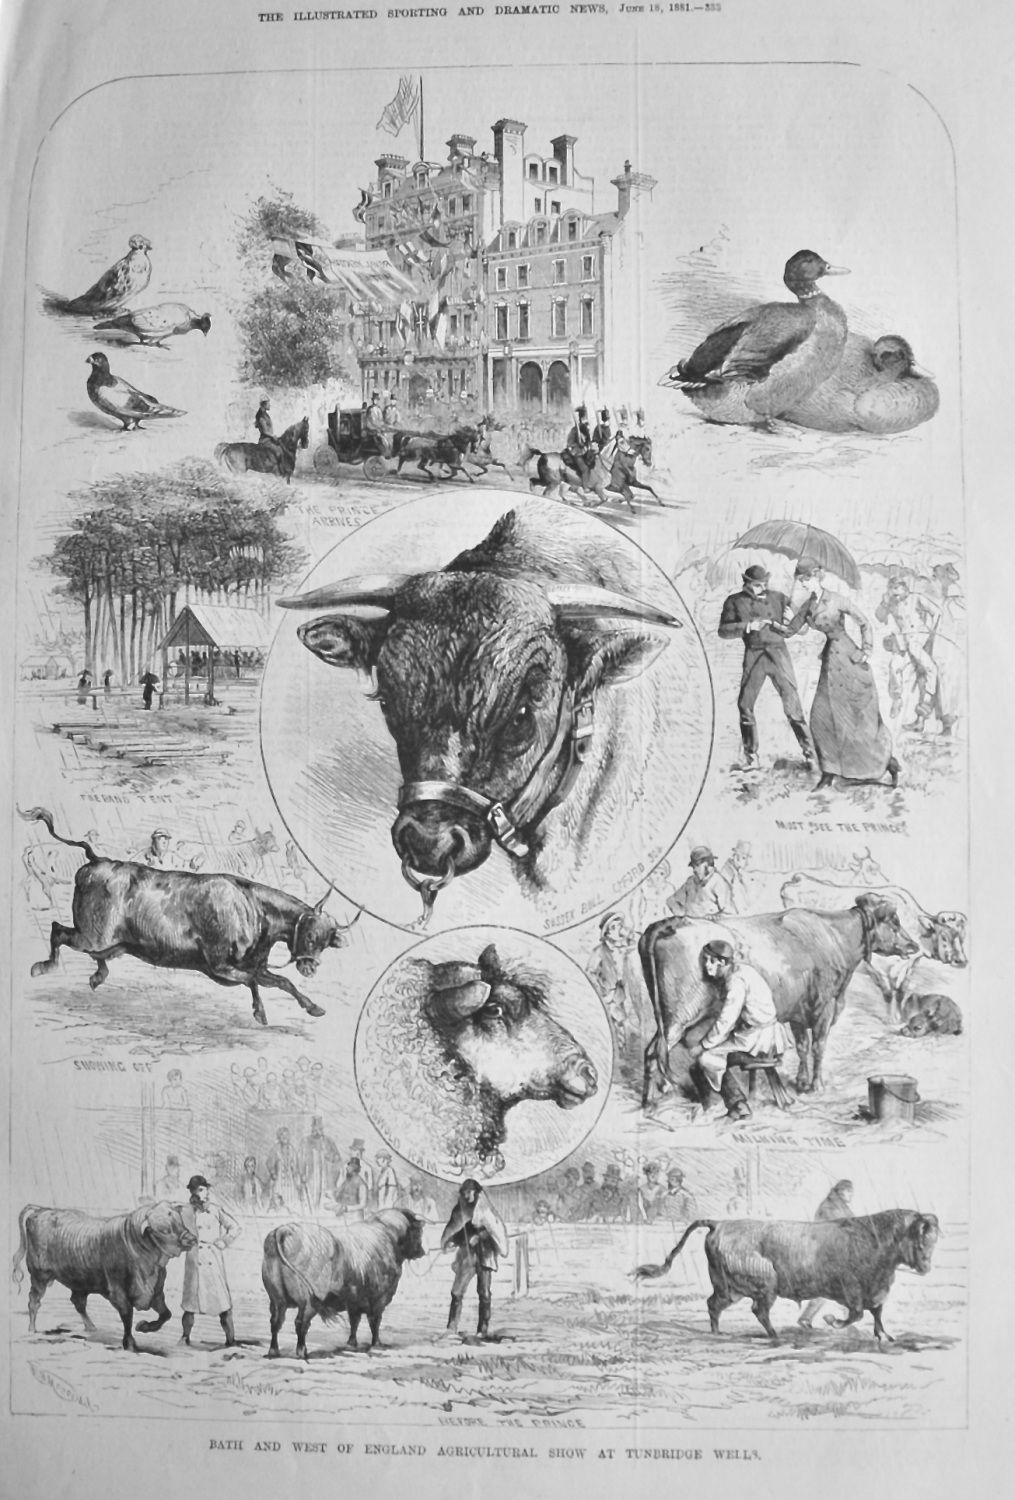 Bath and West of England Agricultural Show at Tunbridge Wells.  1881.